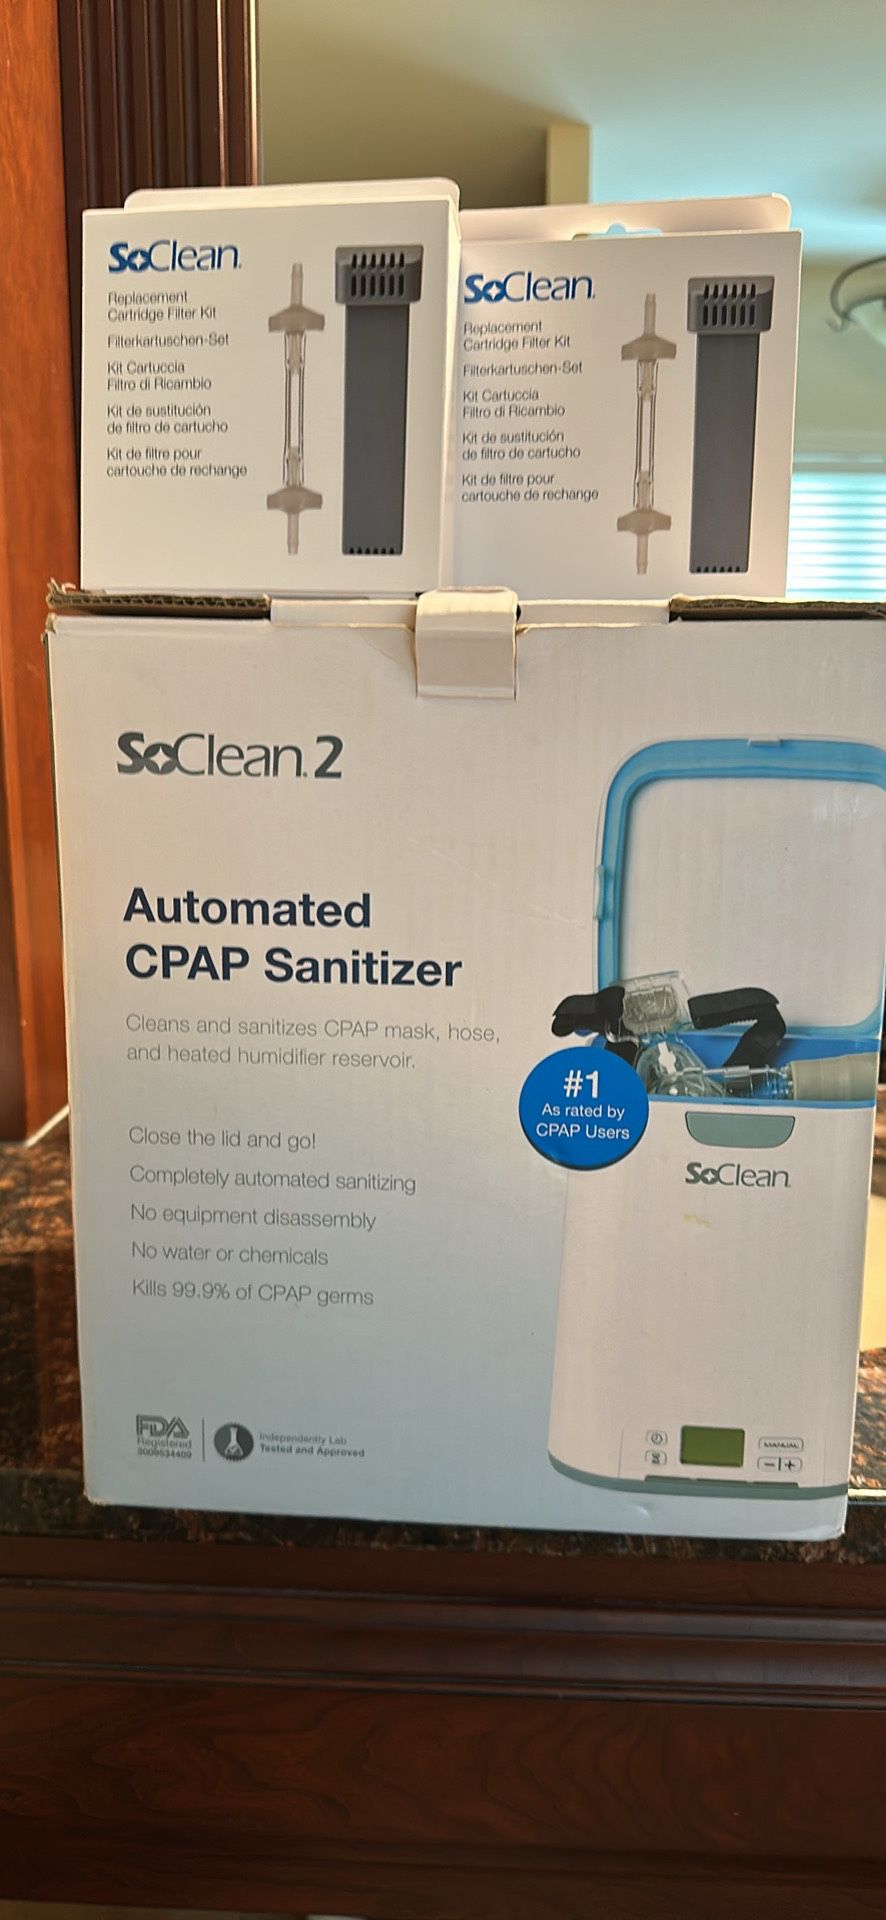 So Clean CPAP Sanitizing System 